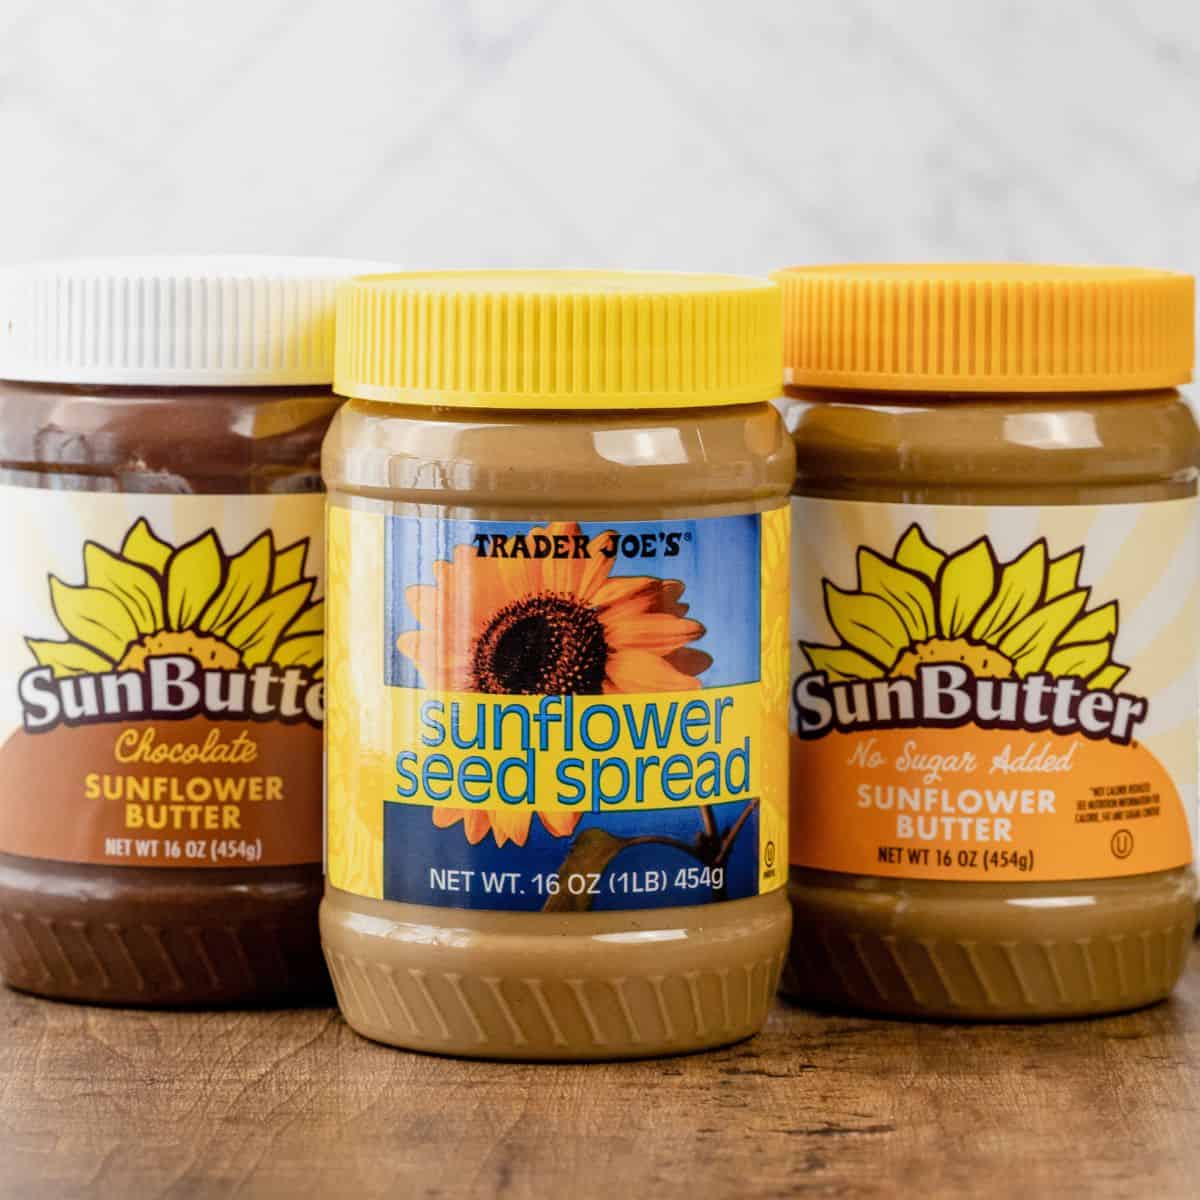 3 types of sunflower seed butter on a wood table in the kitchen. It includes Trader Joe's Sunflower Seed Butter and SunButter.